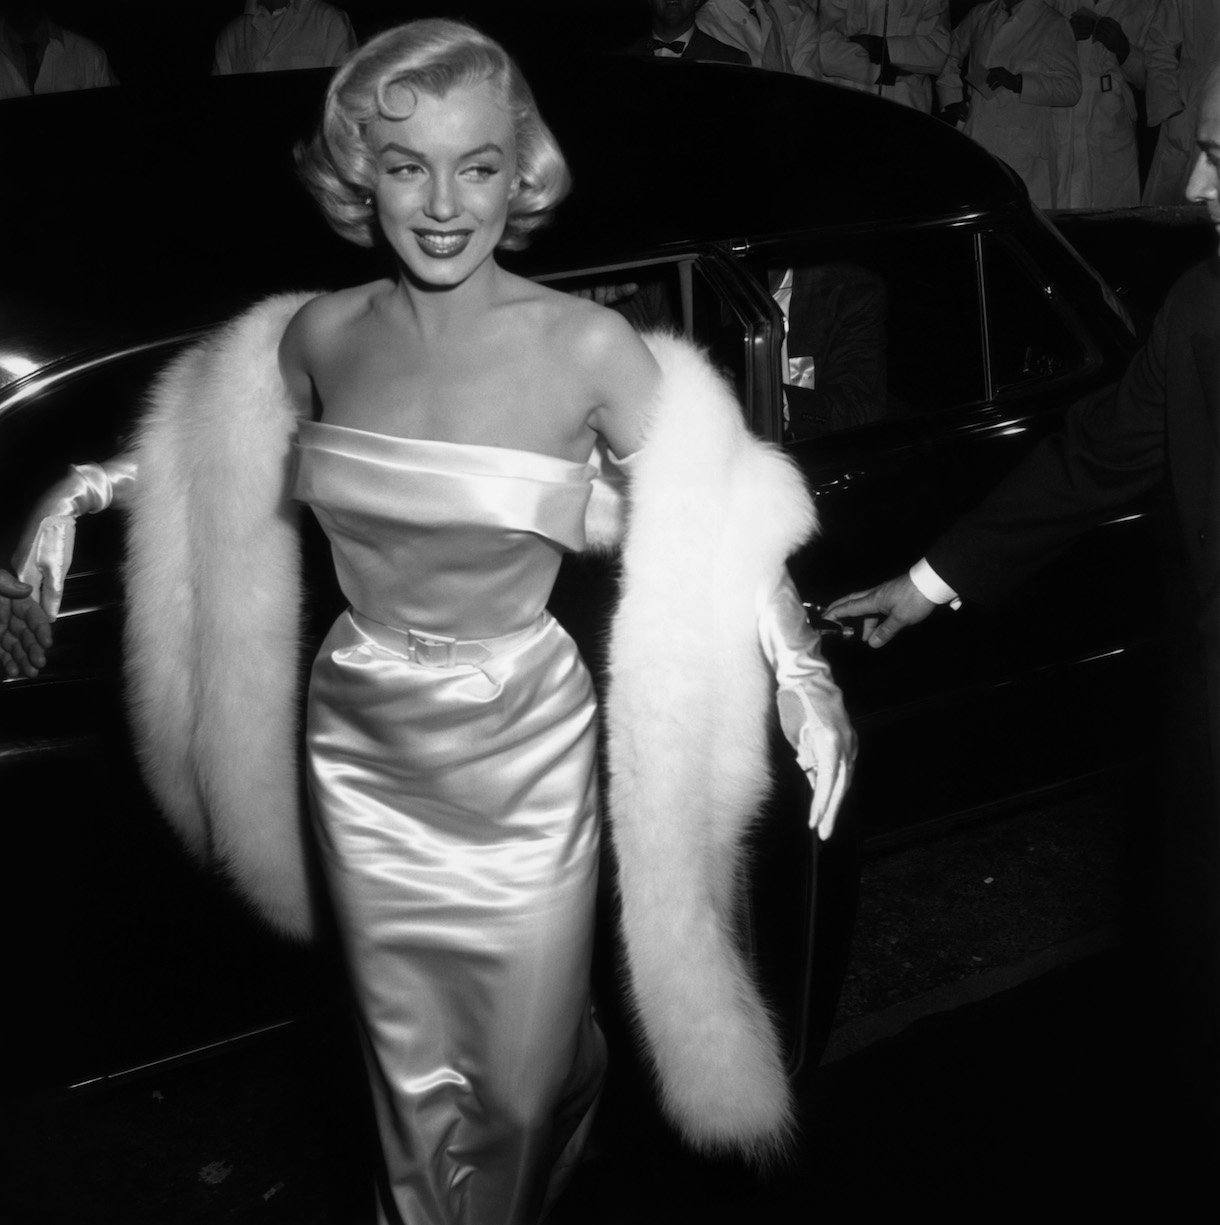 1954: Marilyn Monroe (1926 - 1962) arriving at the premiere of the film 'There's No Business like Show Business'